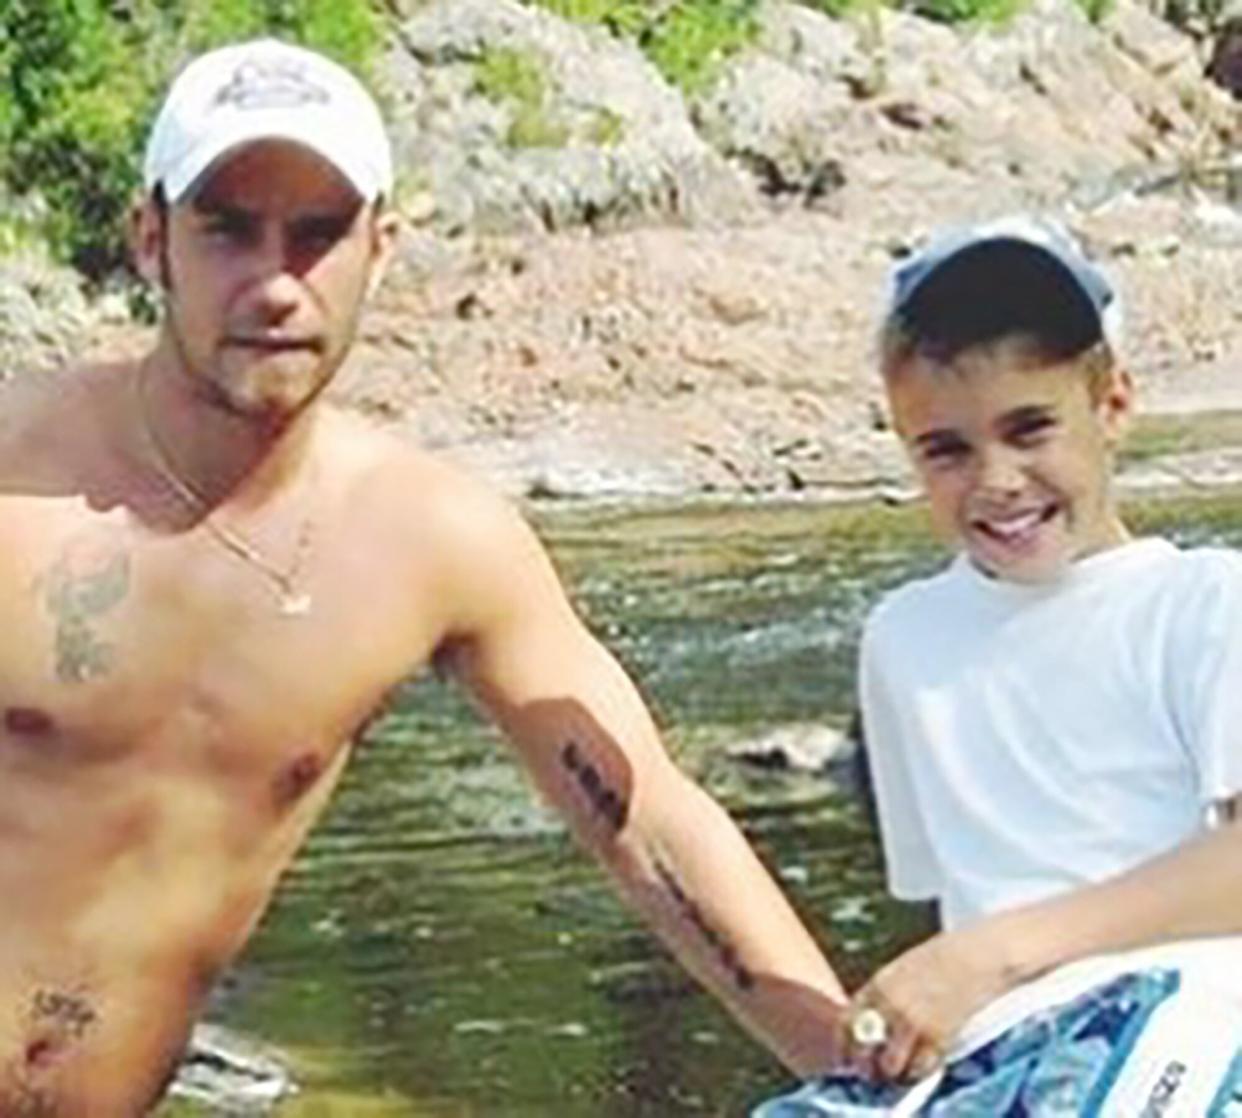 Justin Bieber Says ‘There’s So Much to Look Forward to’ and ‘Best Is Still Ahead’ in Father’s Day Post . https://www.instagram.com/p/Ce_SfVOOctT/?hl=en